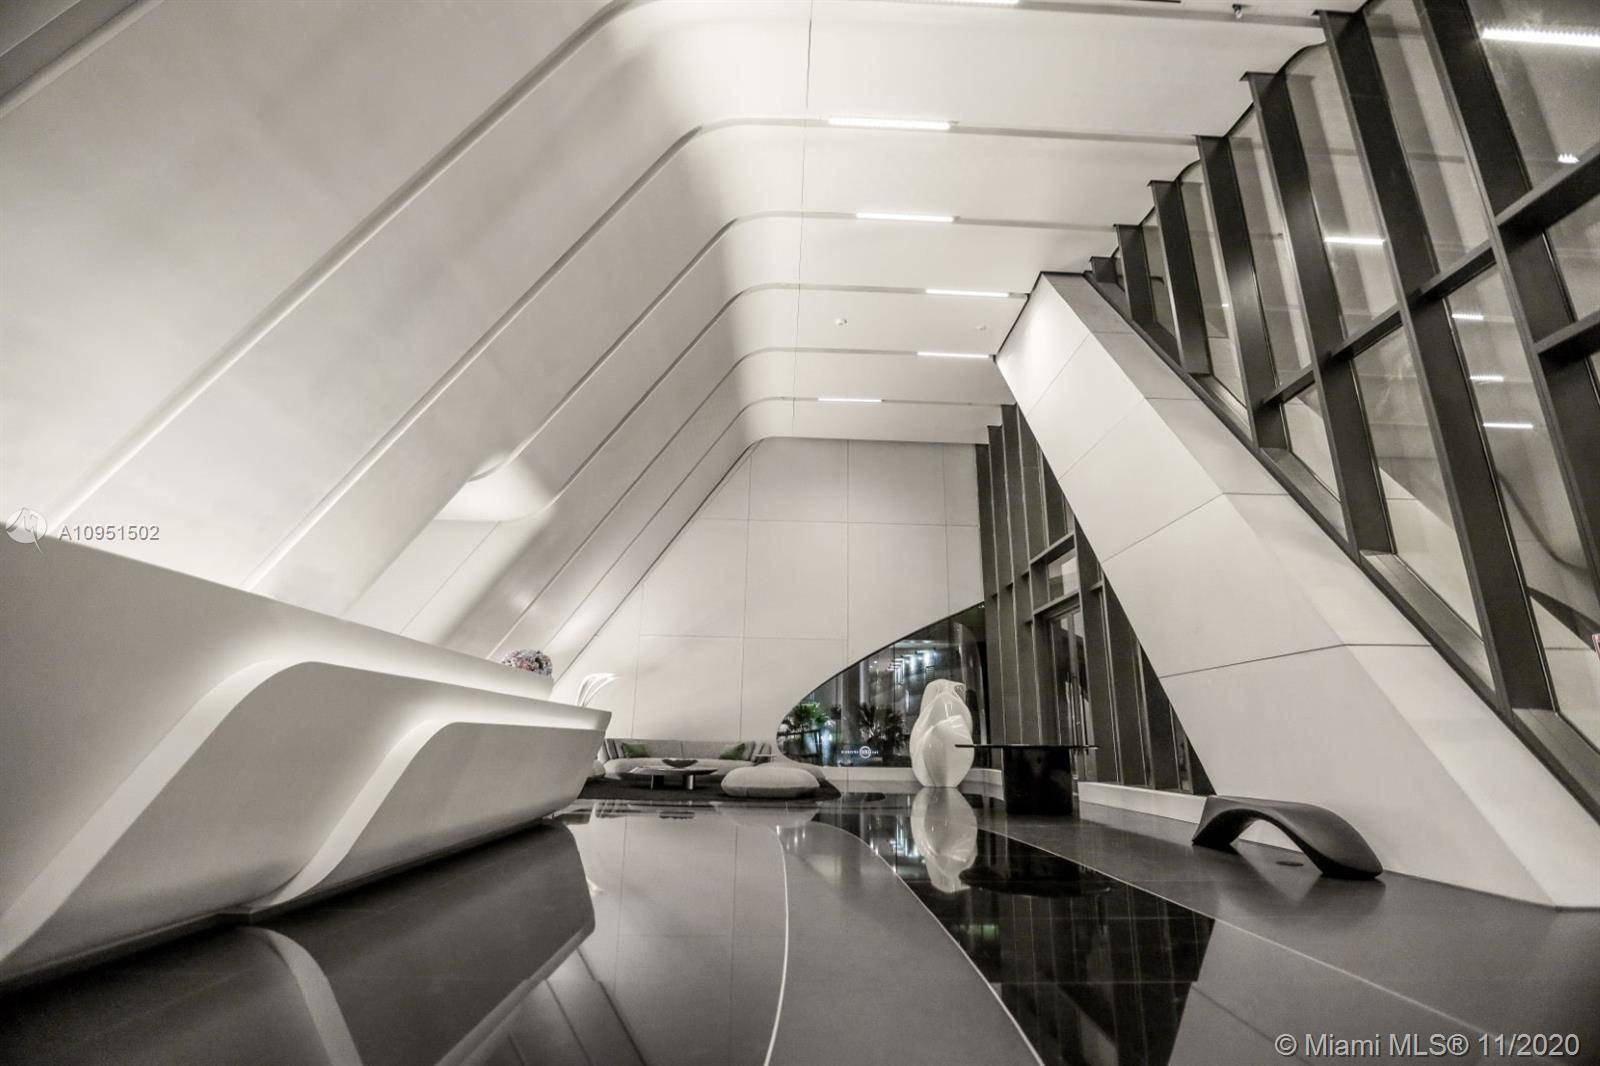 This property is located in the most trending tower in Miami Fl, the last project of Zaha Hadid was her dream project and is now an iconic building in Miami.